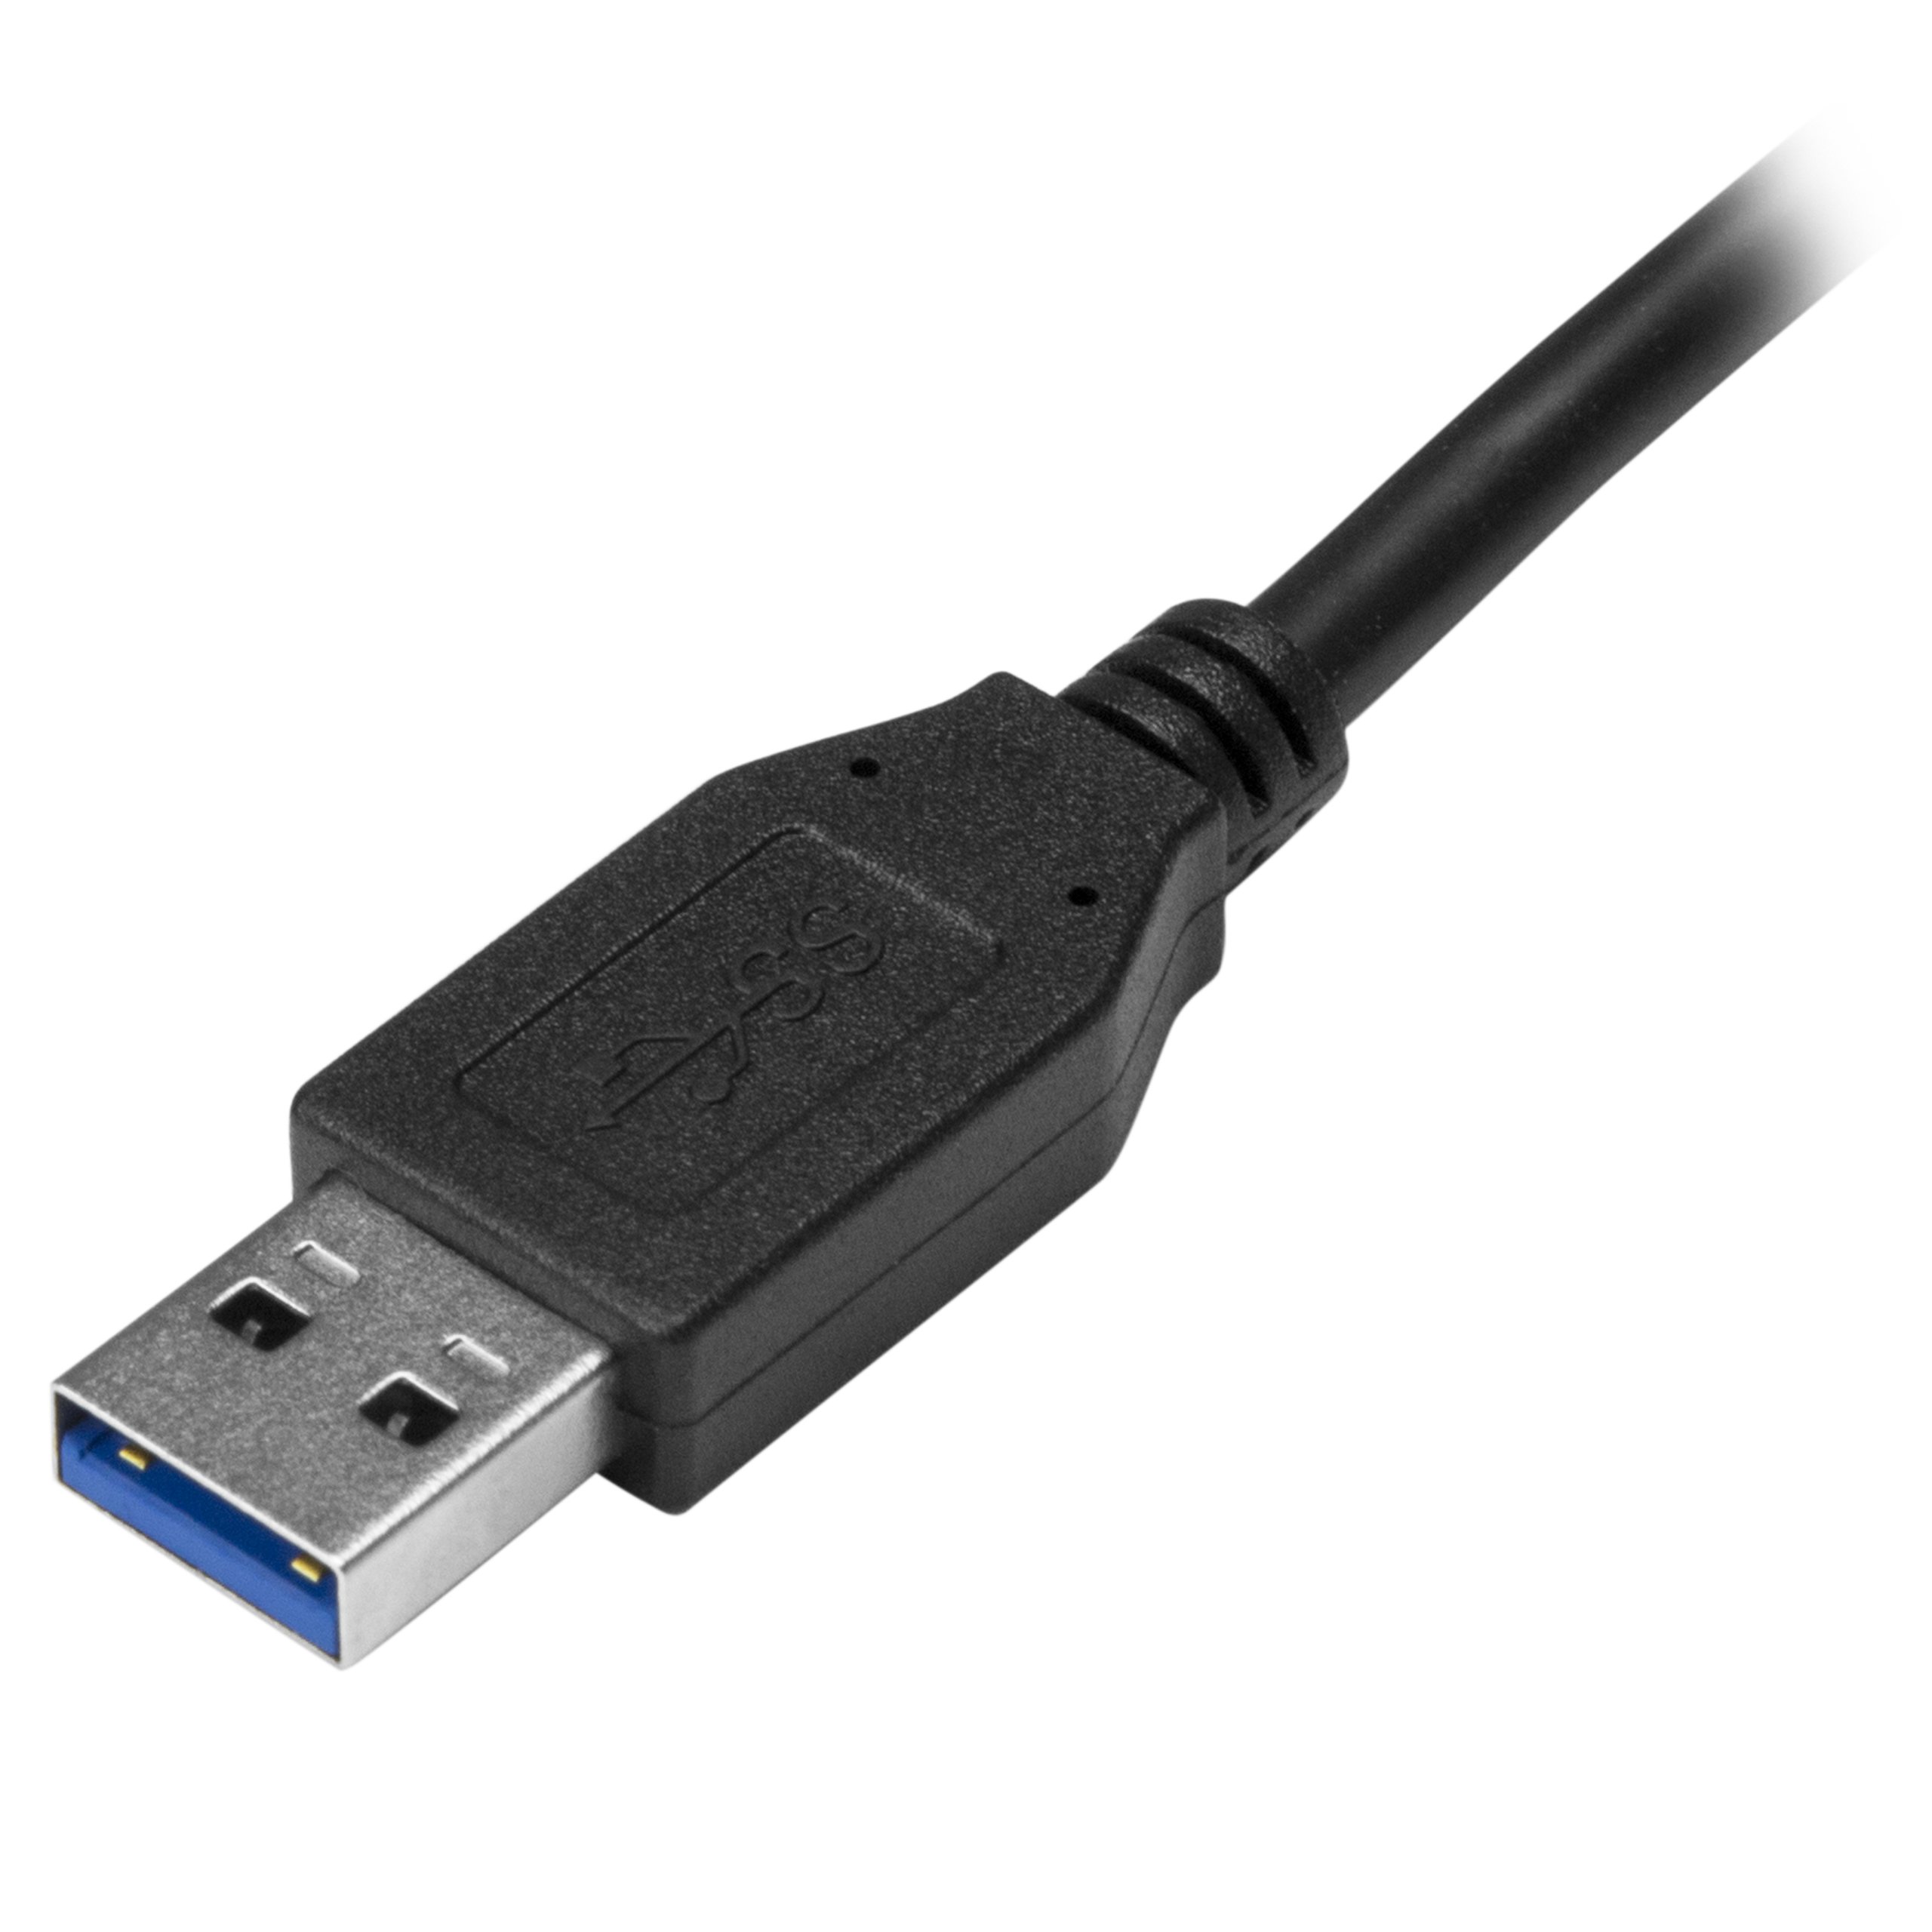 StarTech.com USB to USB C Cable - 3 ft / 1m - 10 Gbps - USB-C to USB-A - USB 2.0 Cable - USB Type C (USB31AC1M),Black